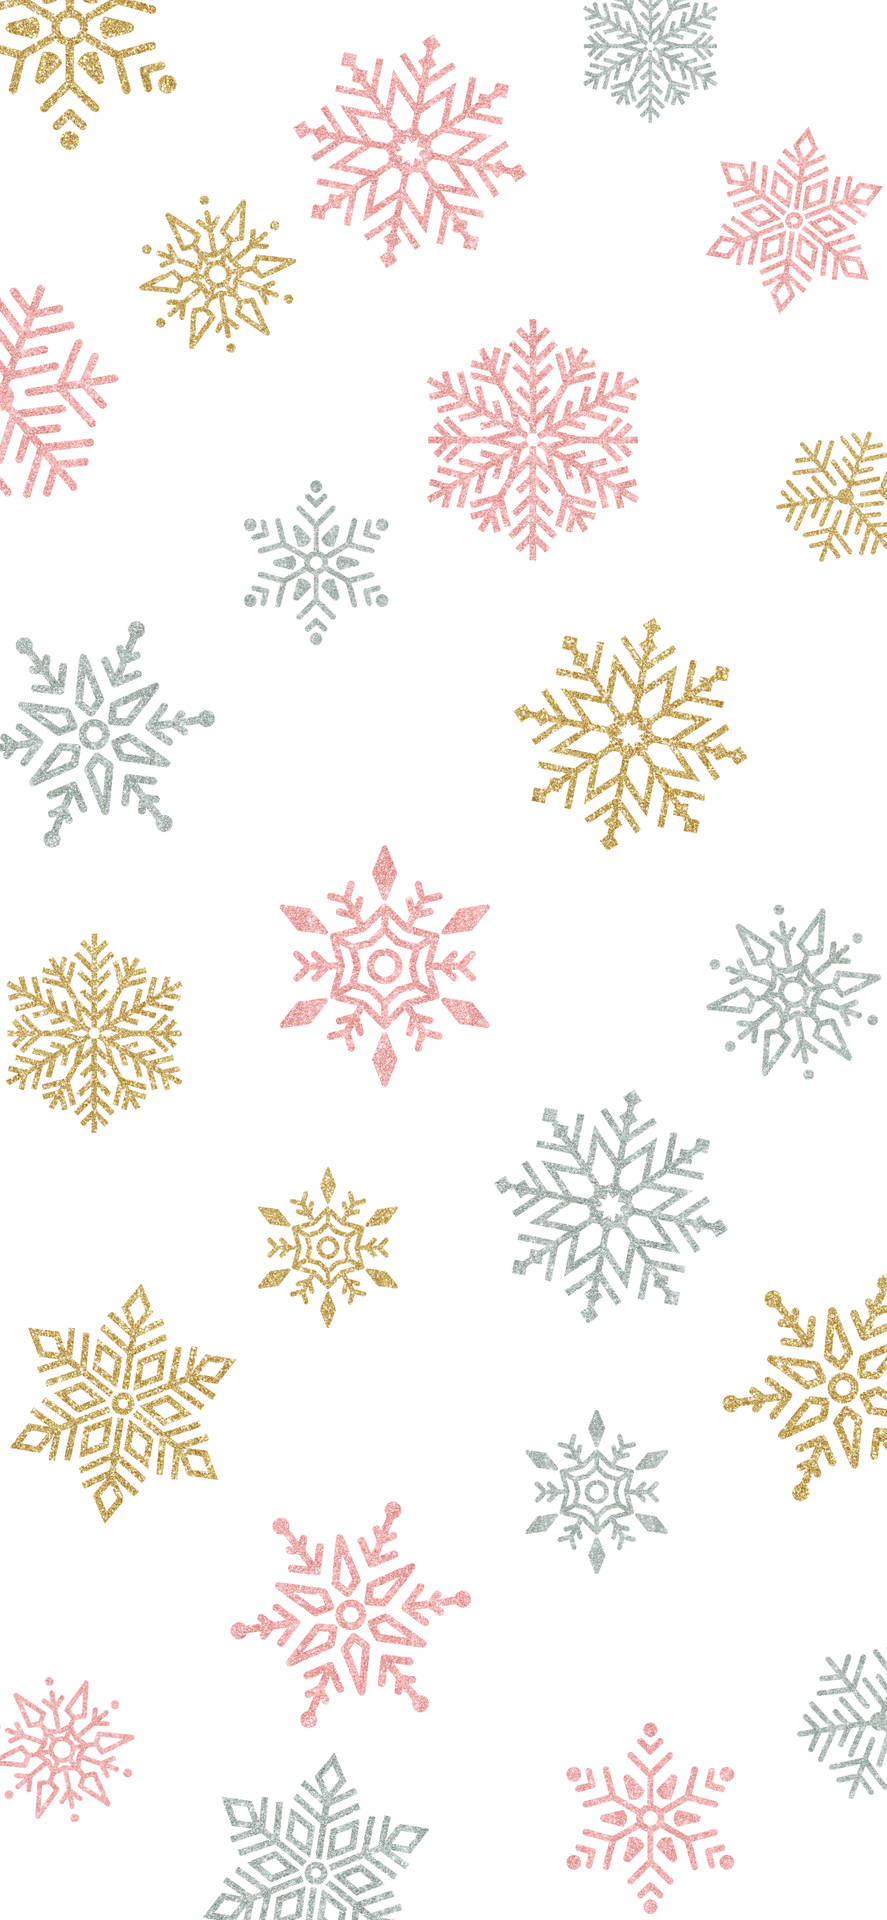 Snowflakes Wallpaper - A White Background With Pink And Gold Snowflakes Wallpaper